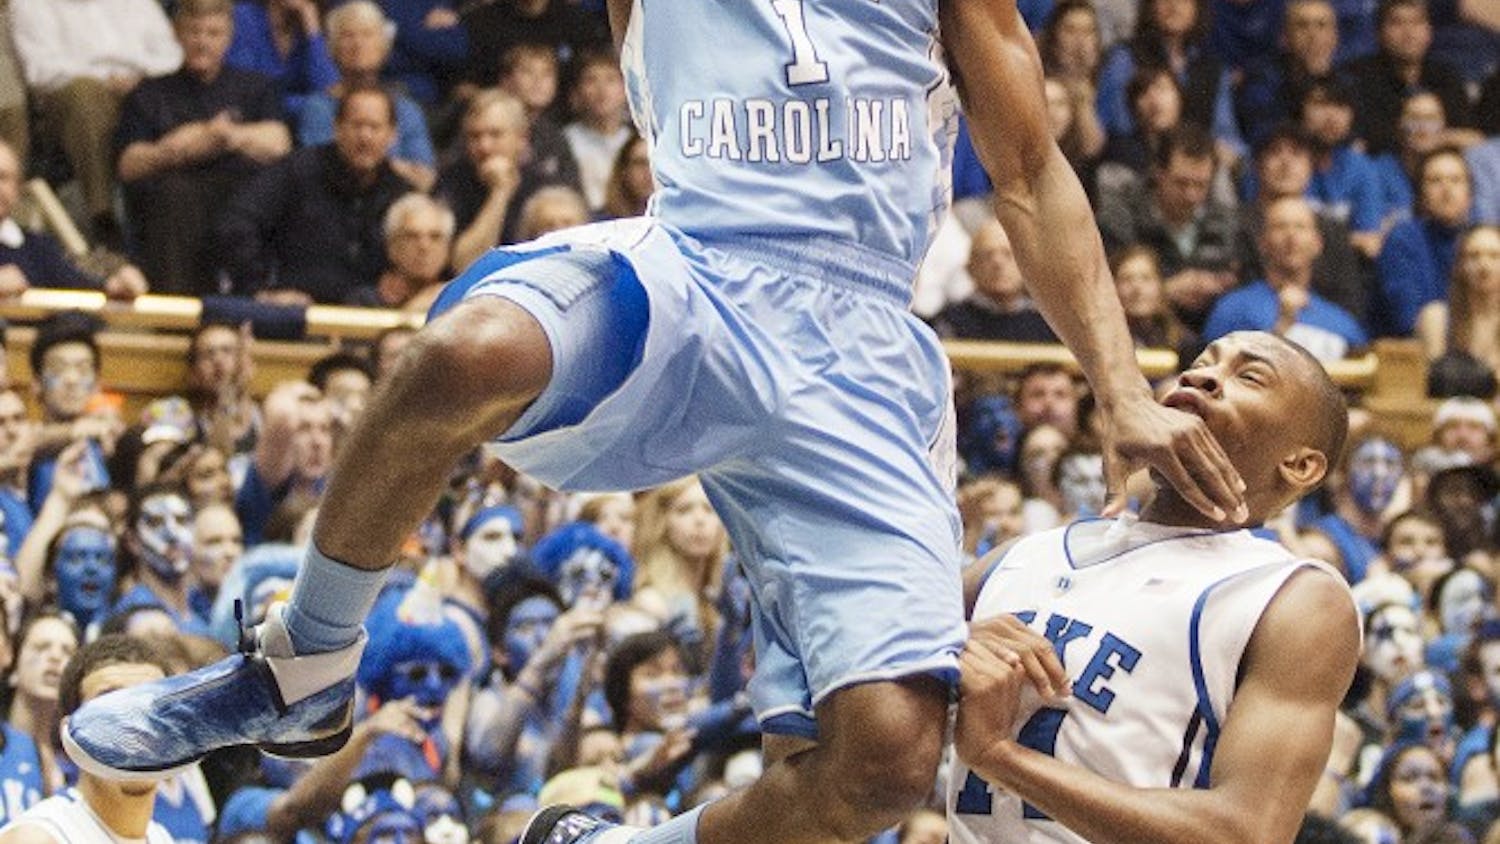 Dexter Strickland drives to the basket during the first half. Strickland scored 6 points for the Tar Heels to help bring Carolina to a 33-29 lead over Duke at the half.